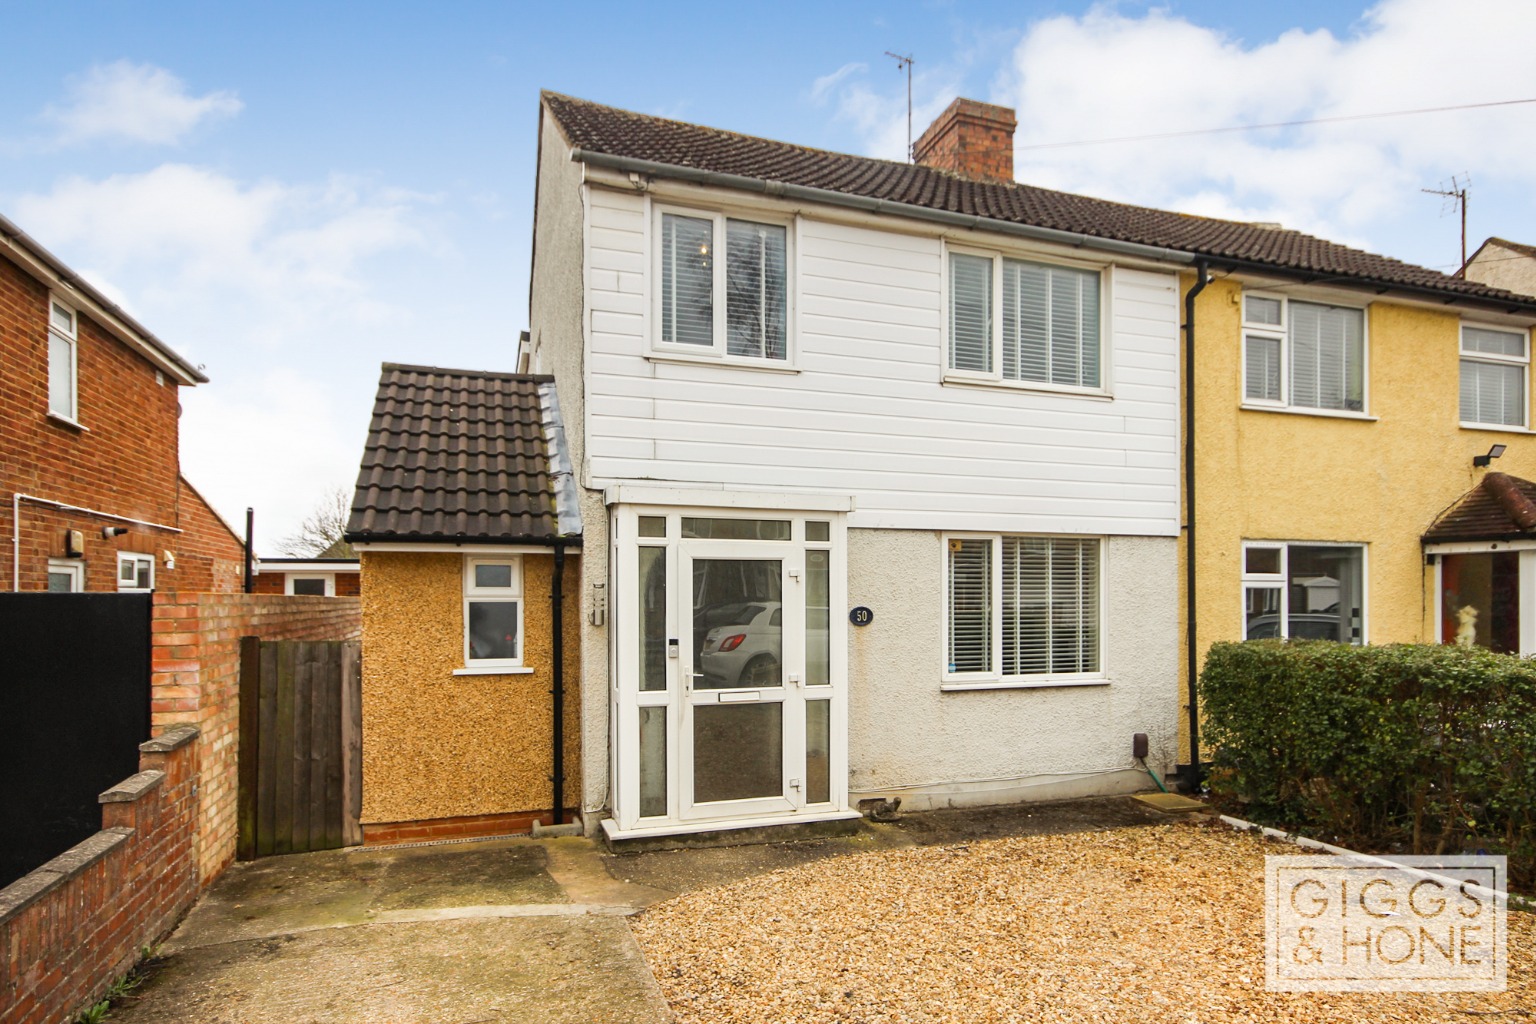 3 bed semi-detached house for sale in Eaton Road, Bedford - Property Image 1